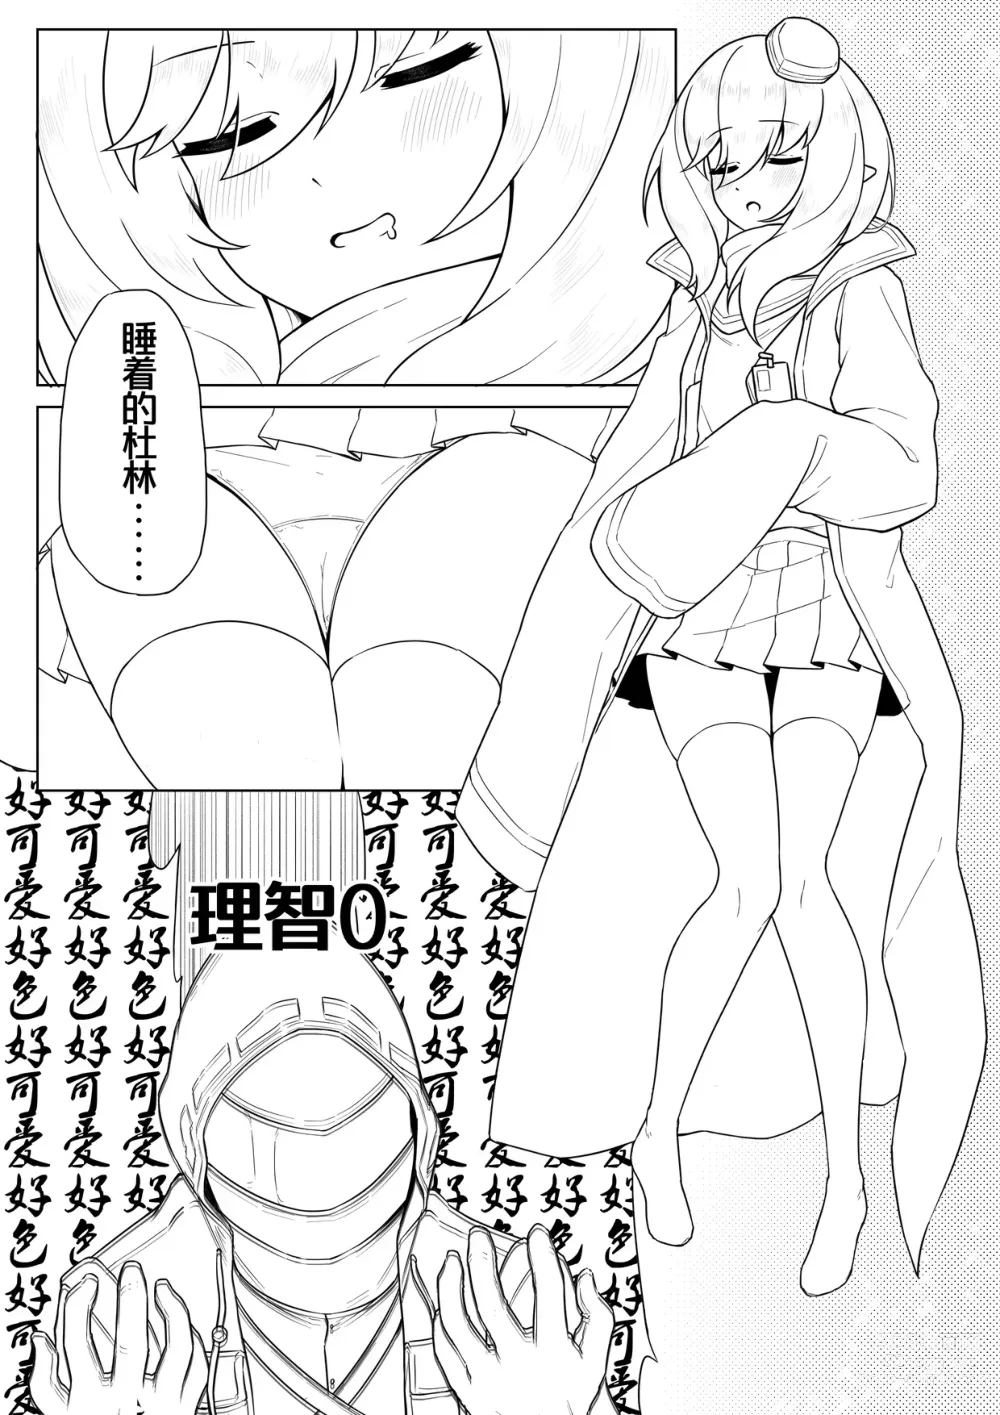 Page 5 of doujinshi Durins Self-hypnosis (decensored)